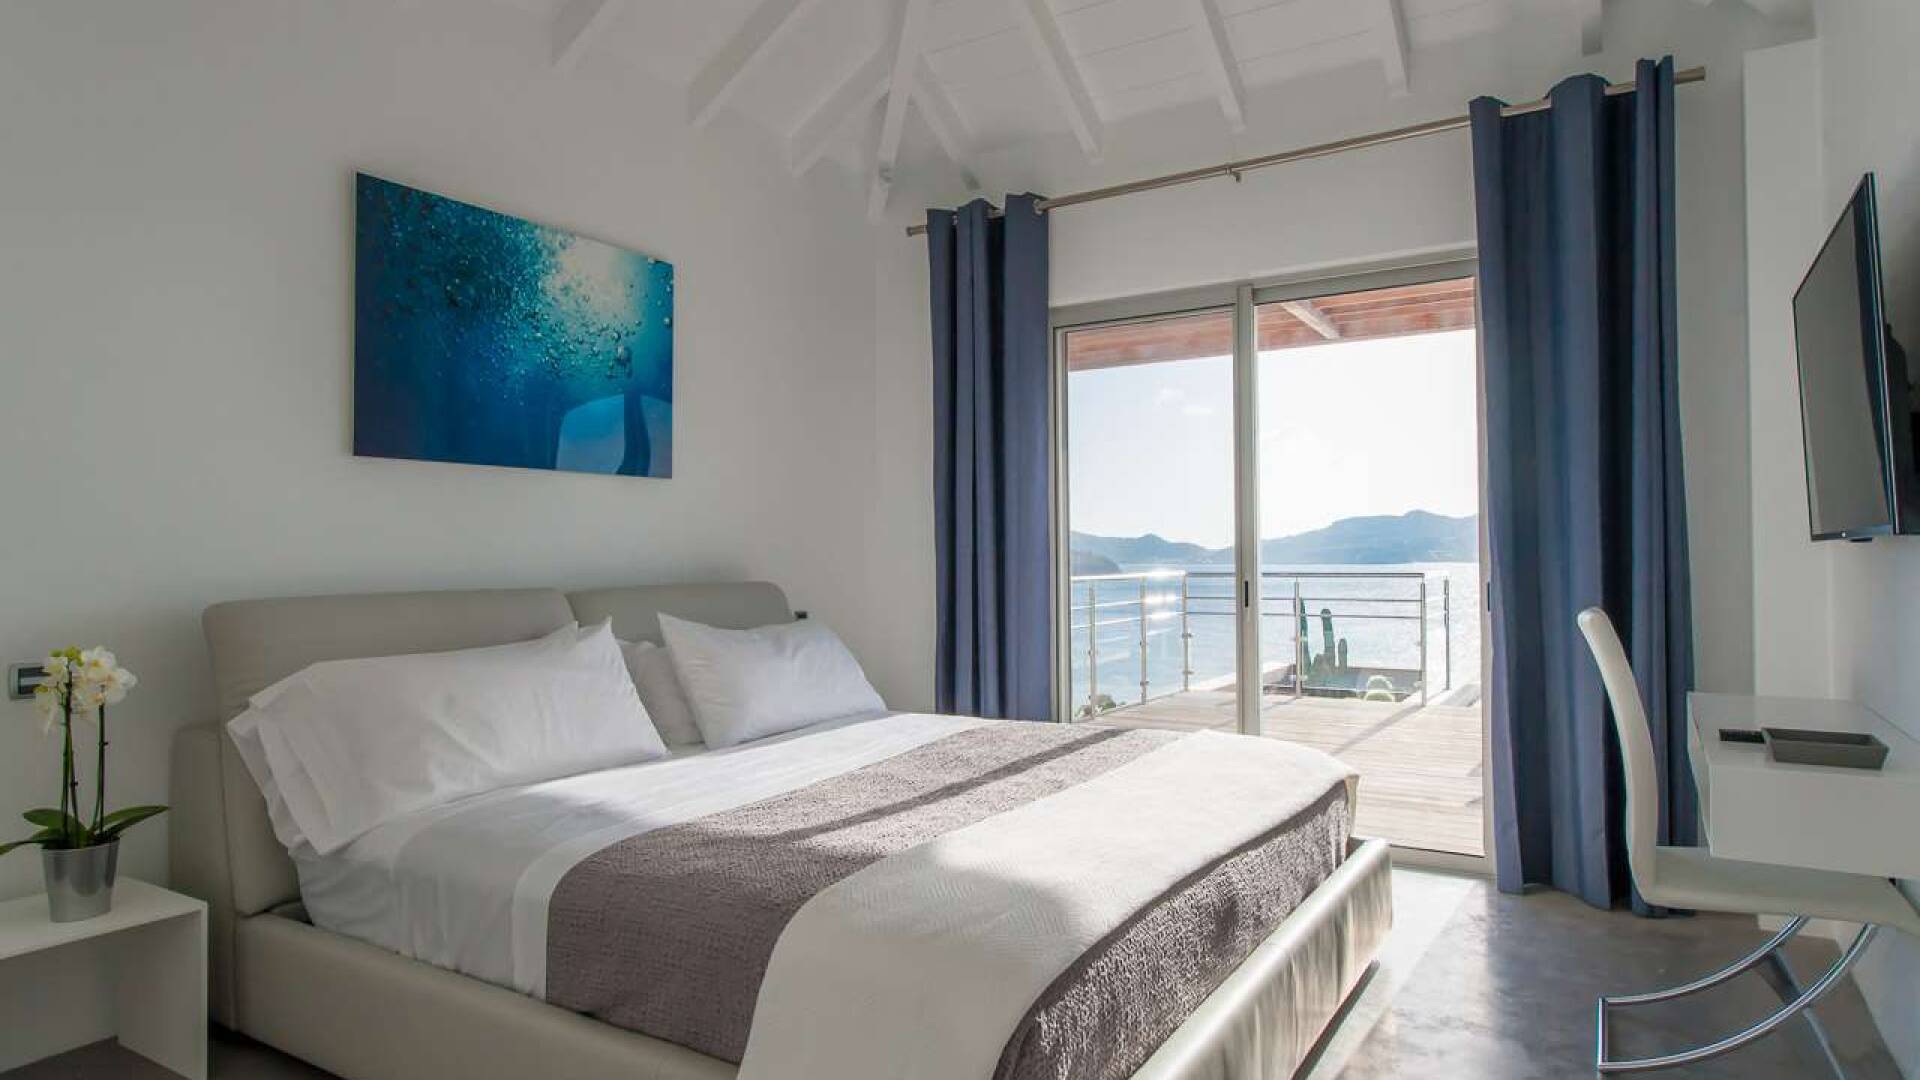 Bedroom at WV VPM, Pointe Milou, St. Barthelemy